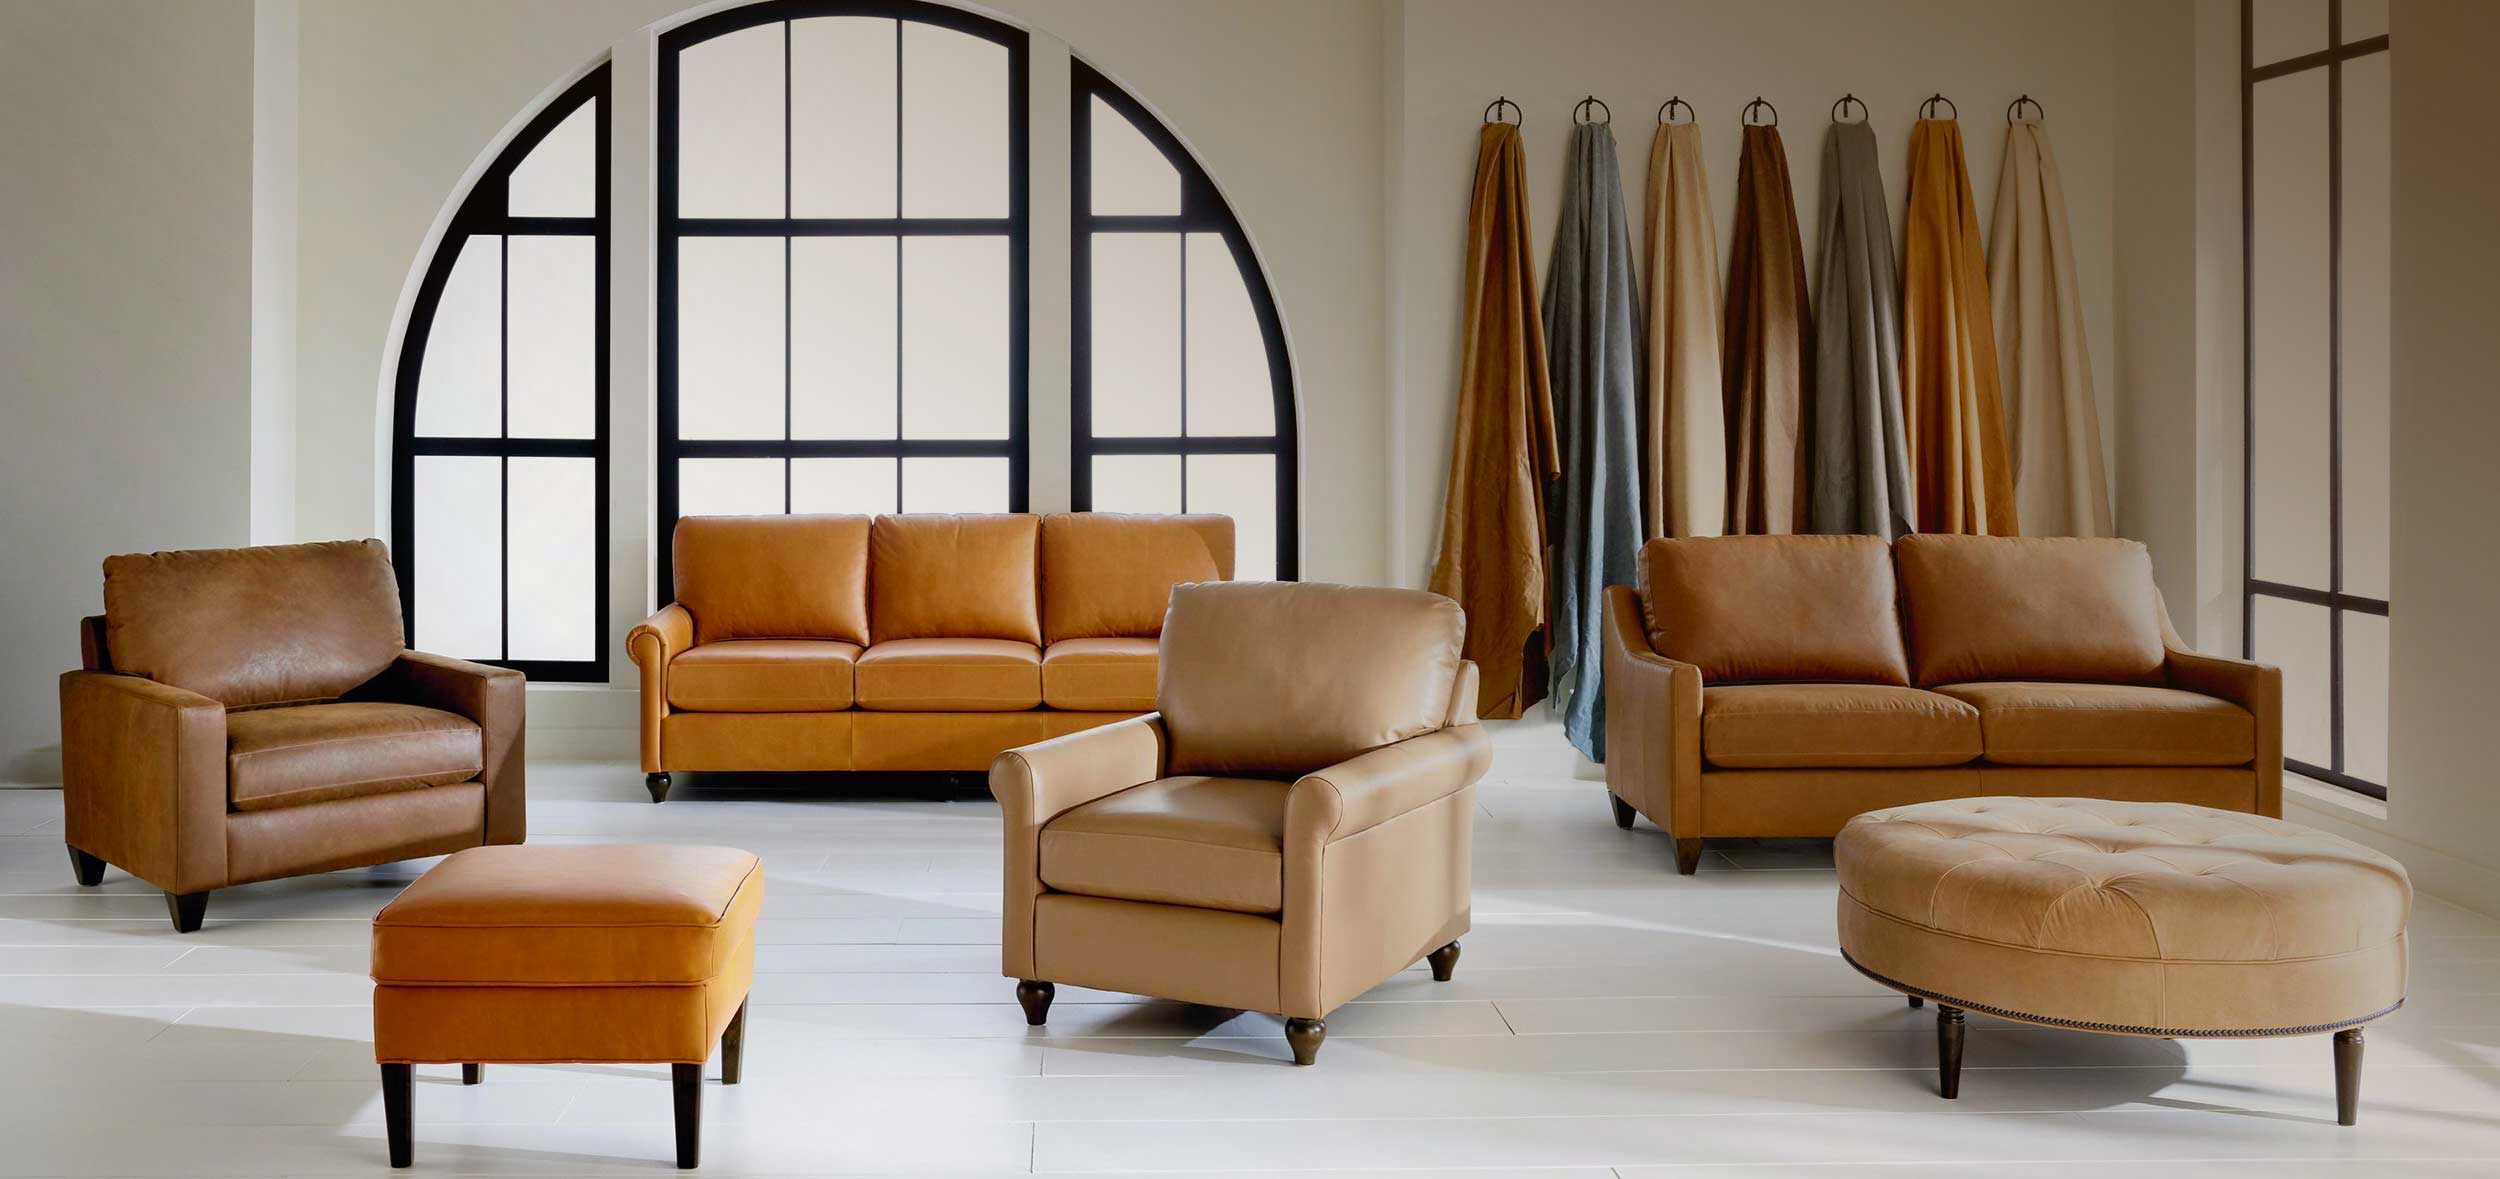 Display of leather hides and upholstered furniture